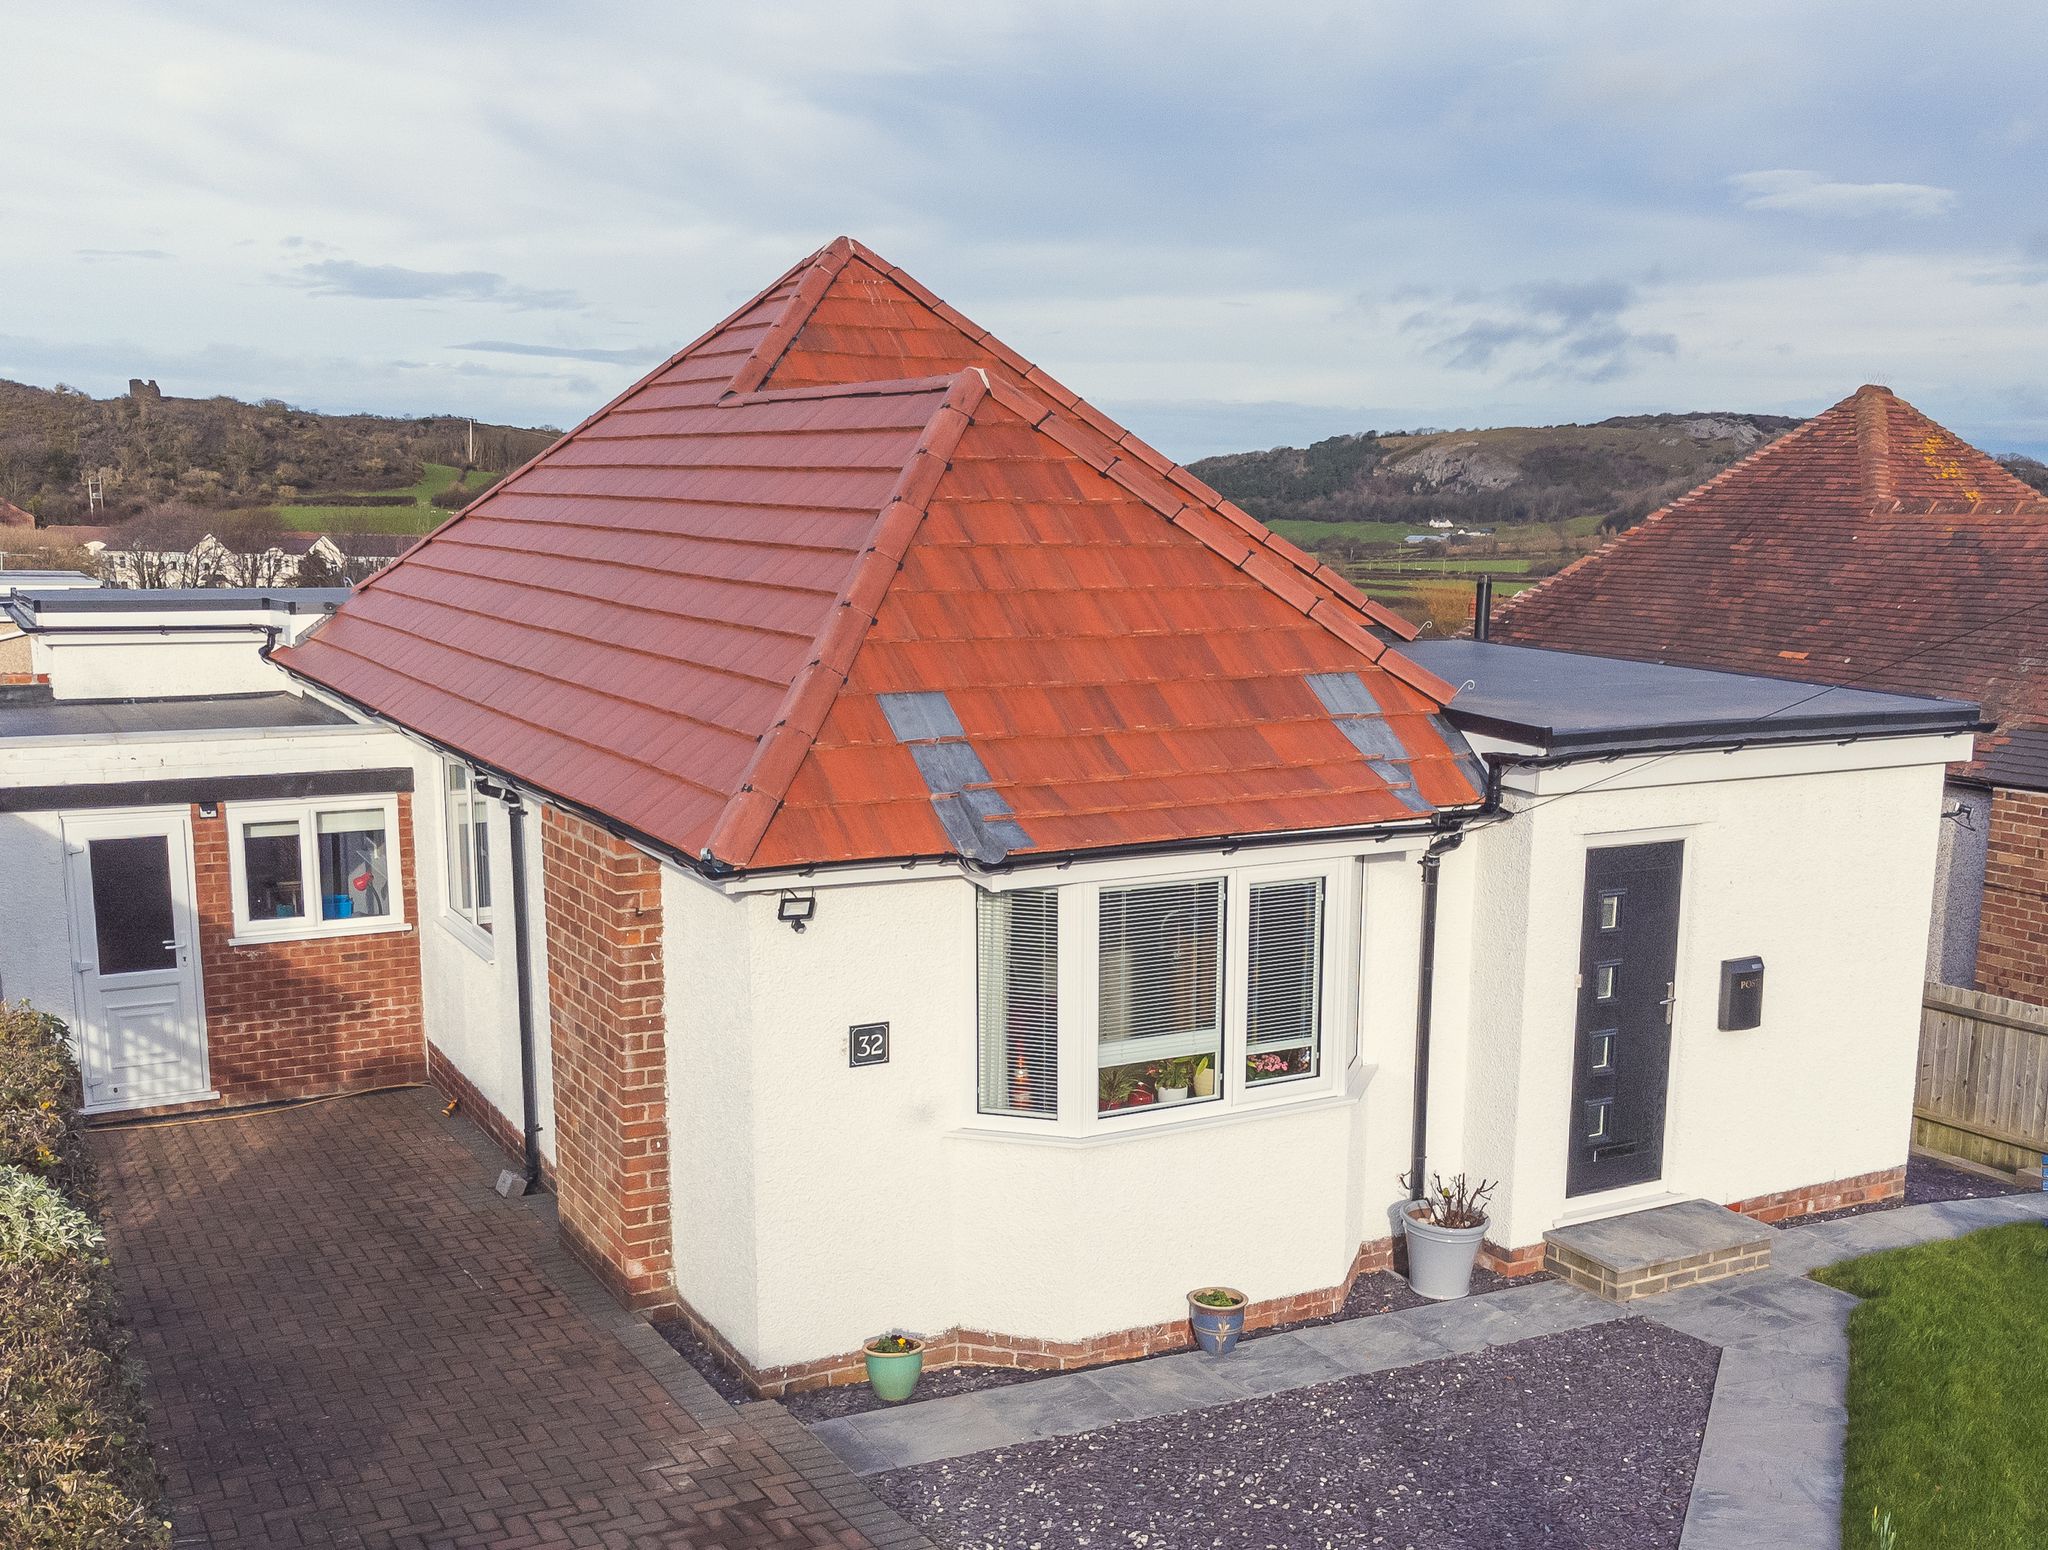 Tile Roof Contractors Tan-y-bwlch, LL41 - DD Roofing